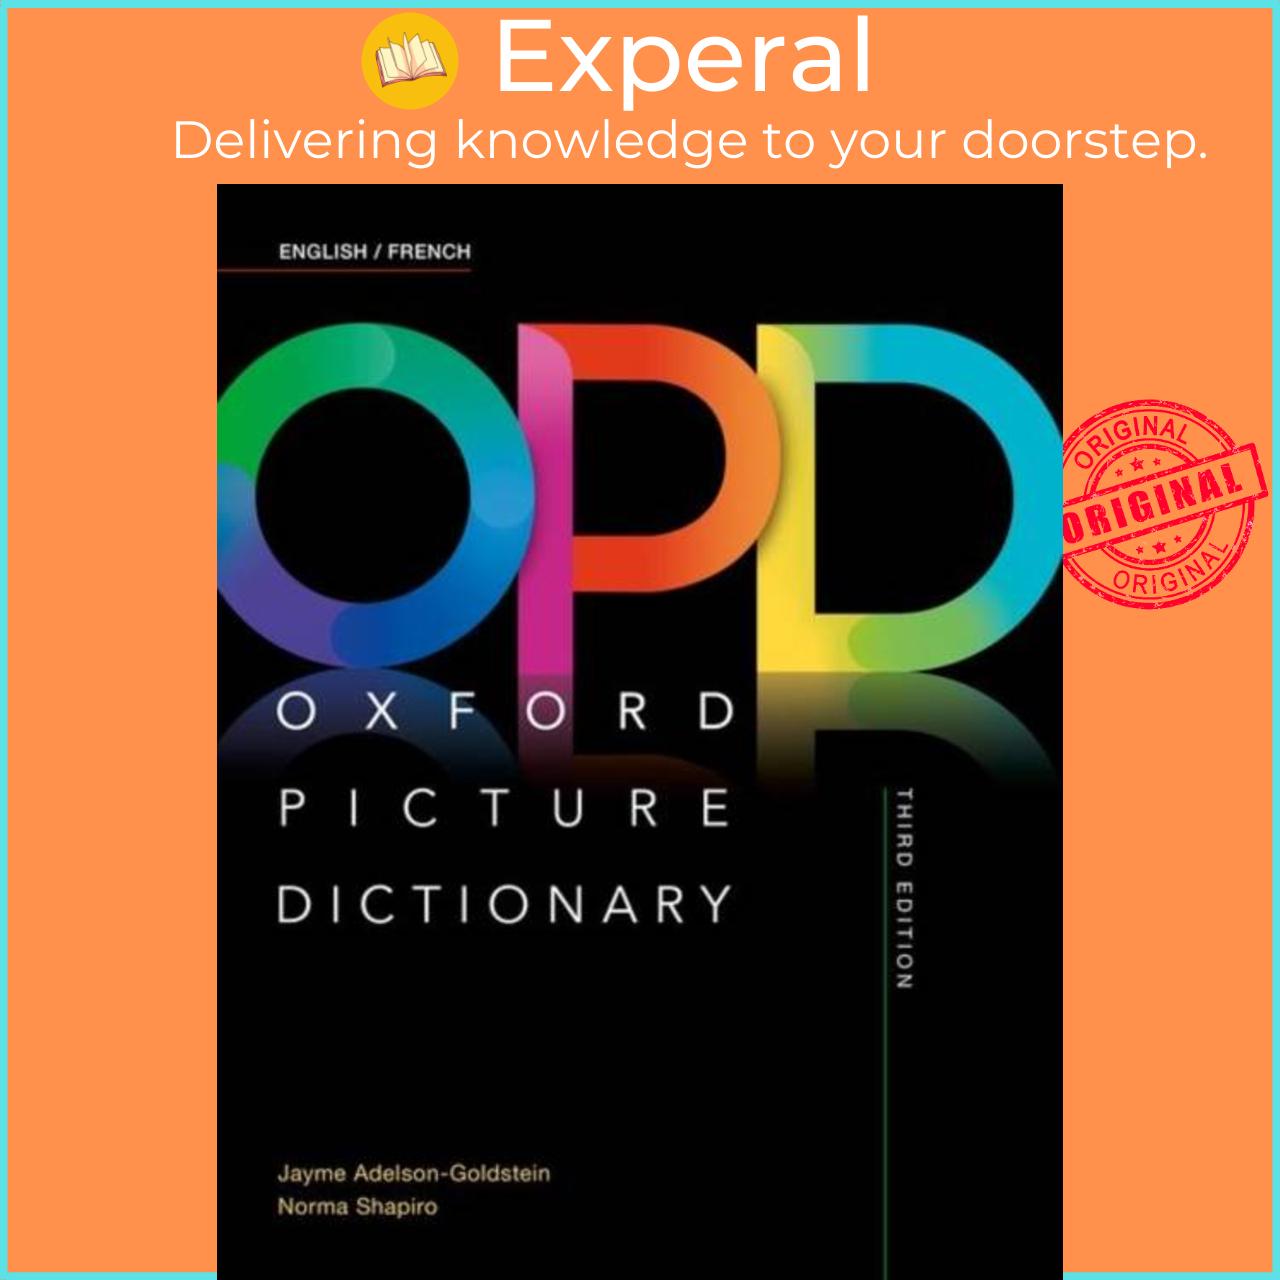 Sách - Oxford Picture Dictionary: English/French Dictionary by Norma Shapiro (UK edition, paperback)